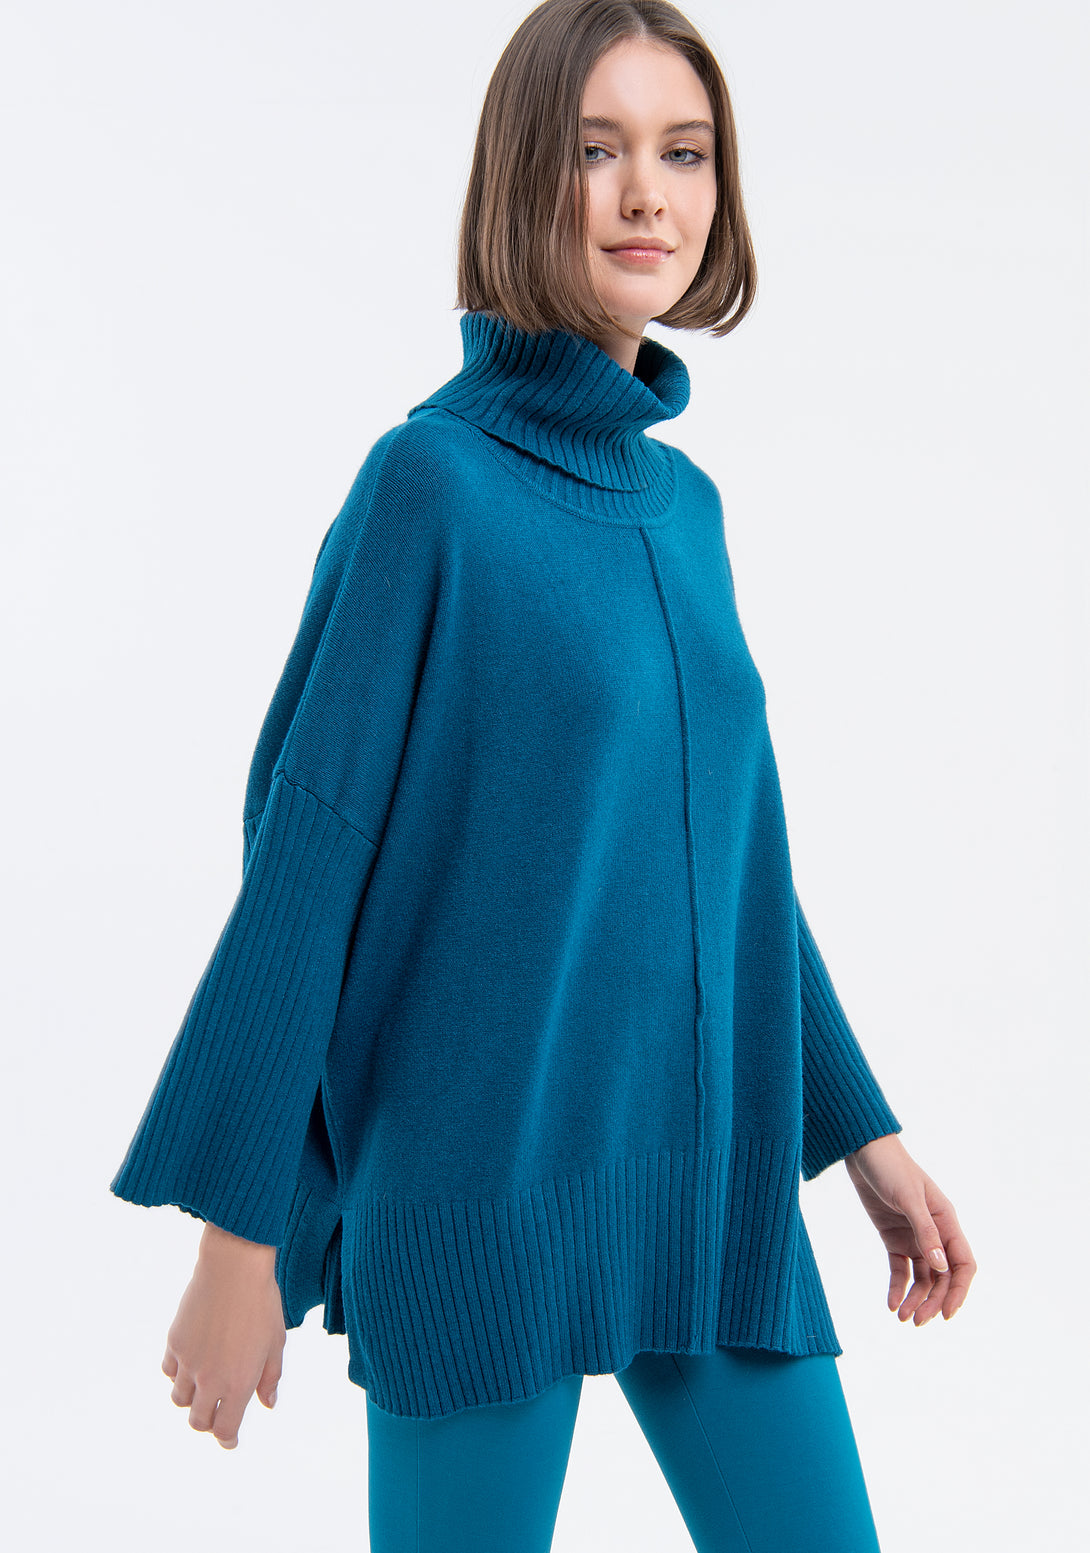 Knitwear over fit with high neck